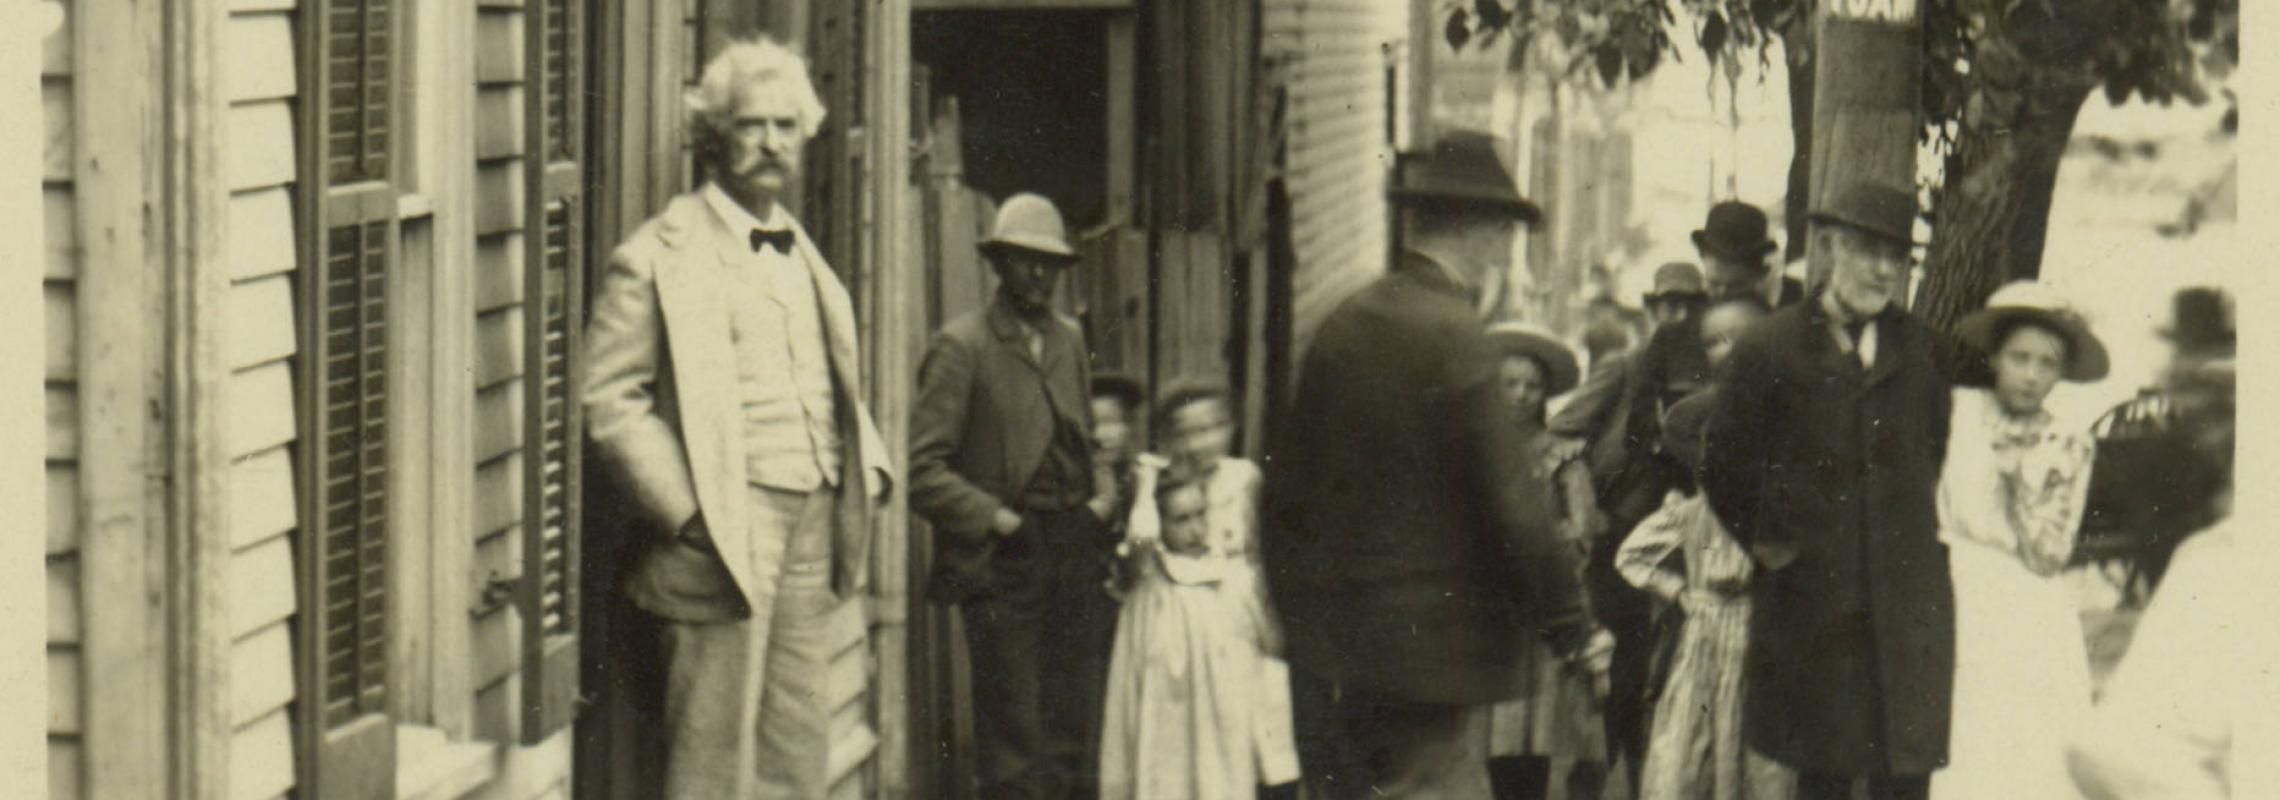 photograph of Mark Twain during a visit to his hometown of Hannibal, Mo.